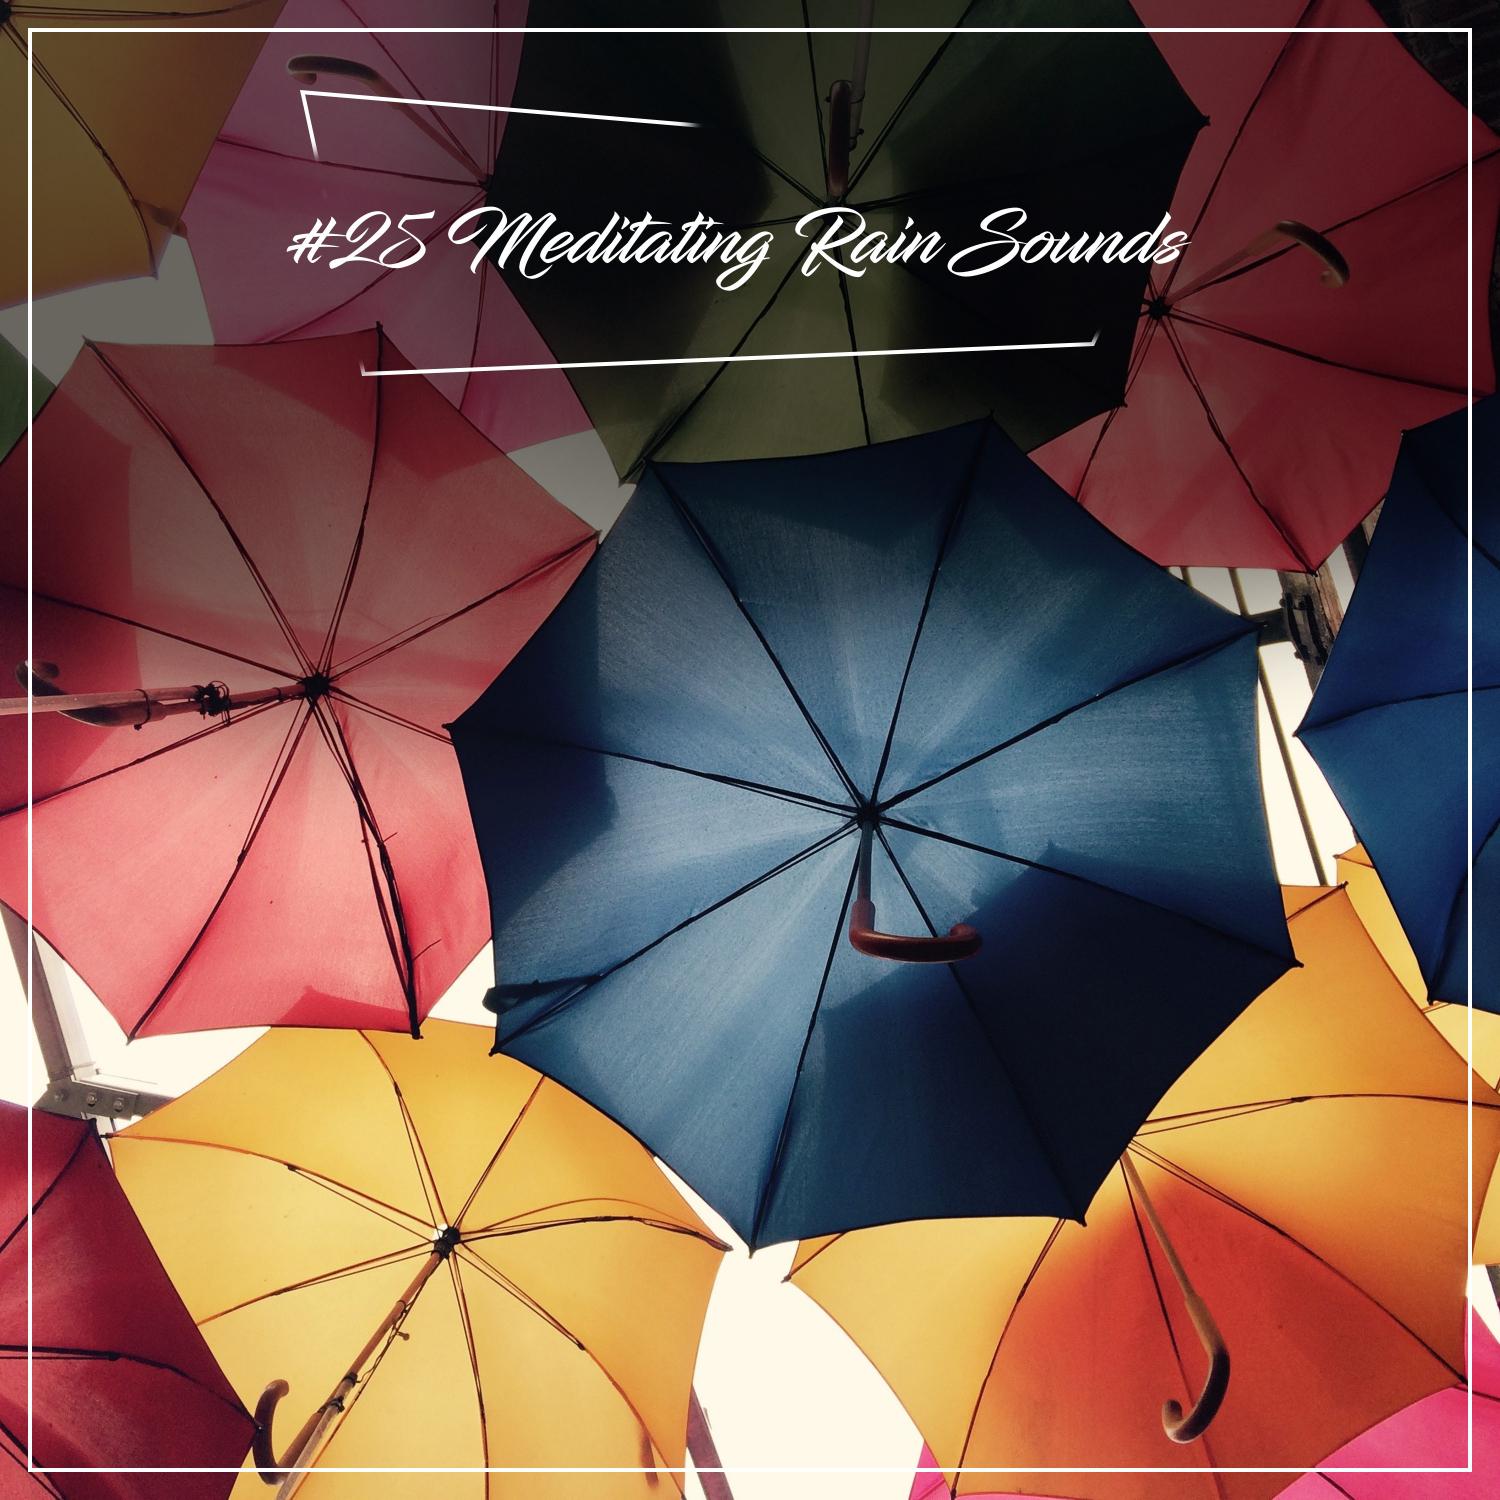 #25 Meditating Rain Sounds - Tranquil Background Noise for Pure Relaxation, Sleep and Yoga